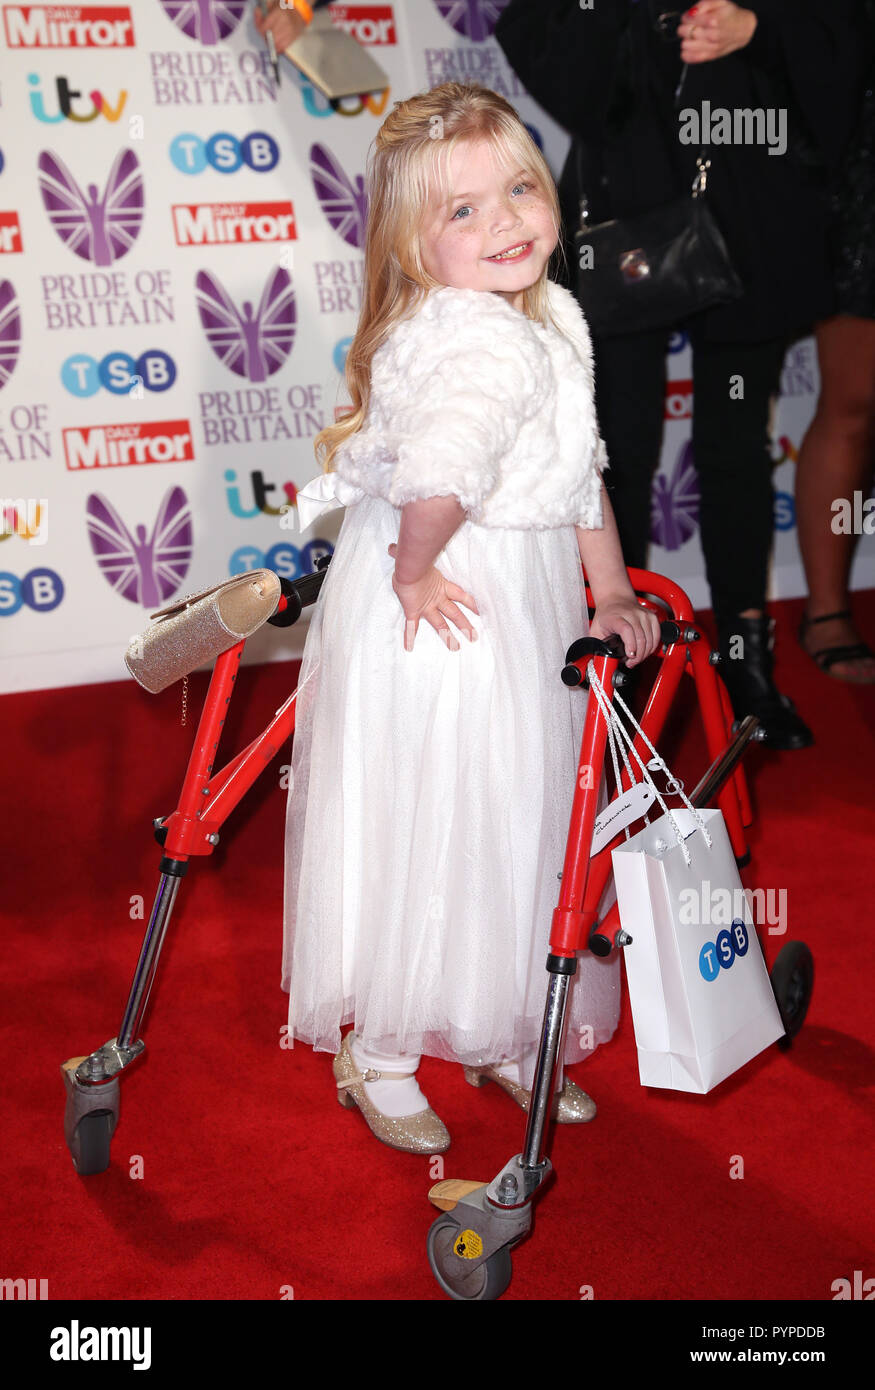 Ella Chadwick during the Pride Of Britain Awards 2018, in partnership with TSB, honouring the nation's unsung heroes and recognising the amazing achievements of ordinary people, held at the Grosvenor House Hotel, London. Stock Photo